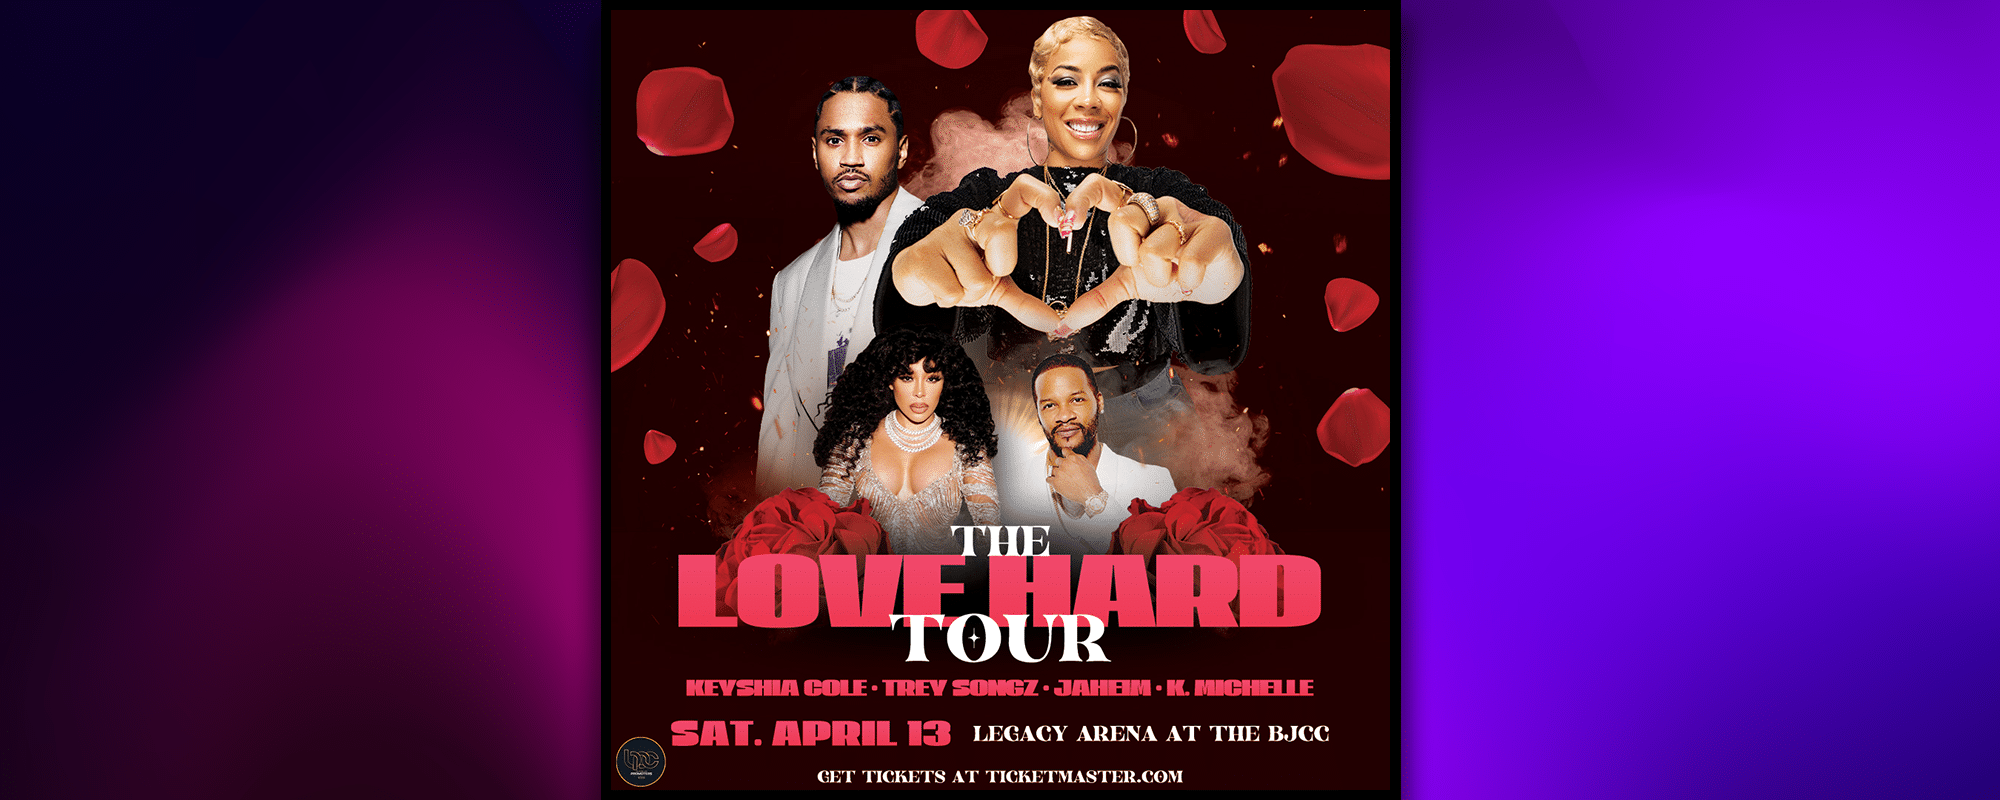 Get tickets to Trey Songz and Keyshia Cole 'Love Hard Tour